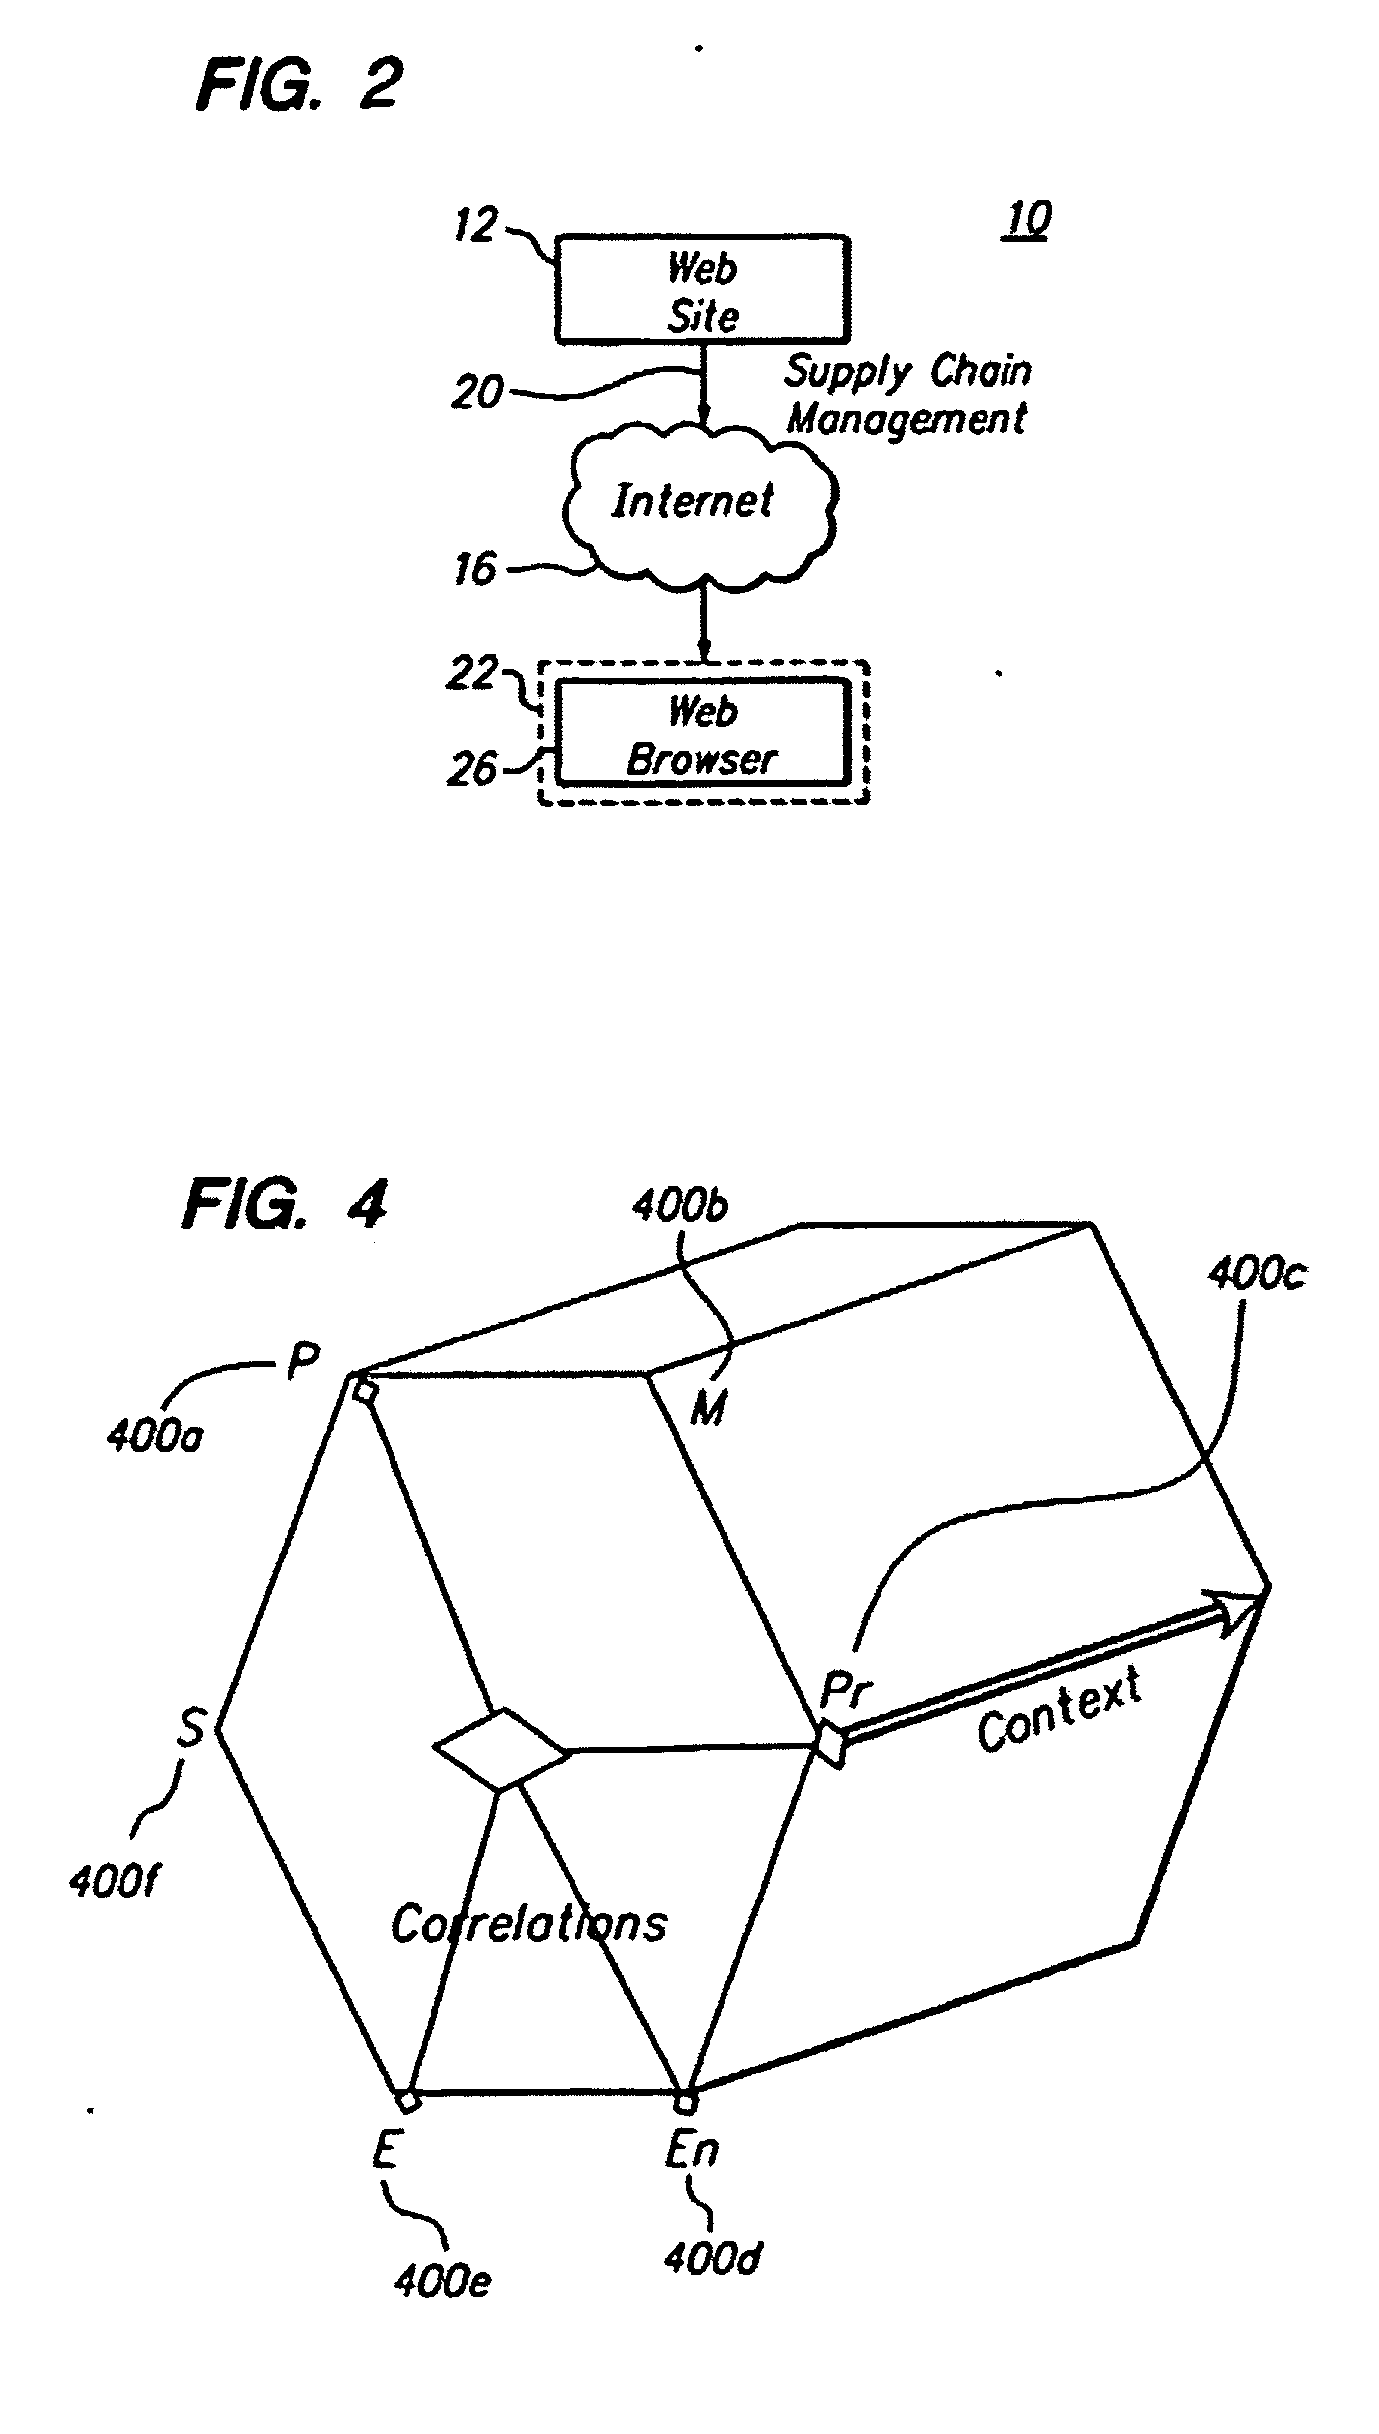 System and method for managing the development and manufacturing of a beverage